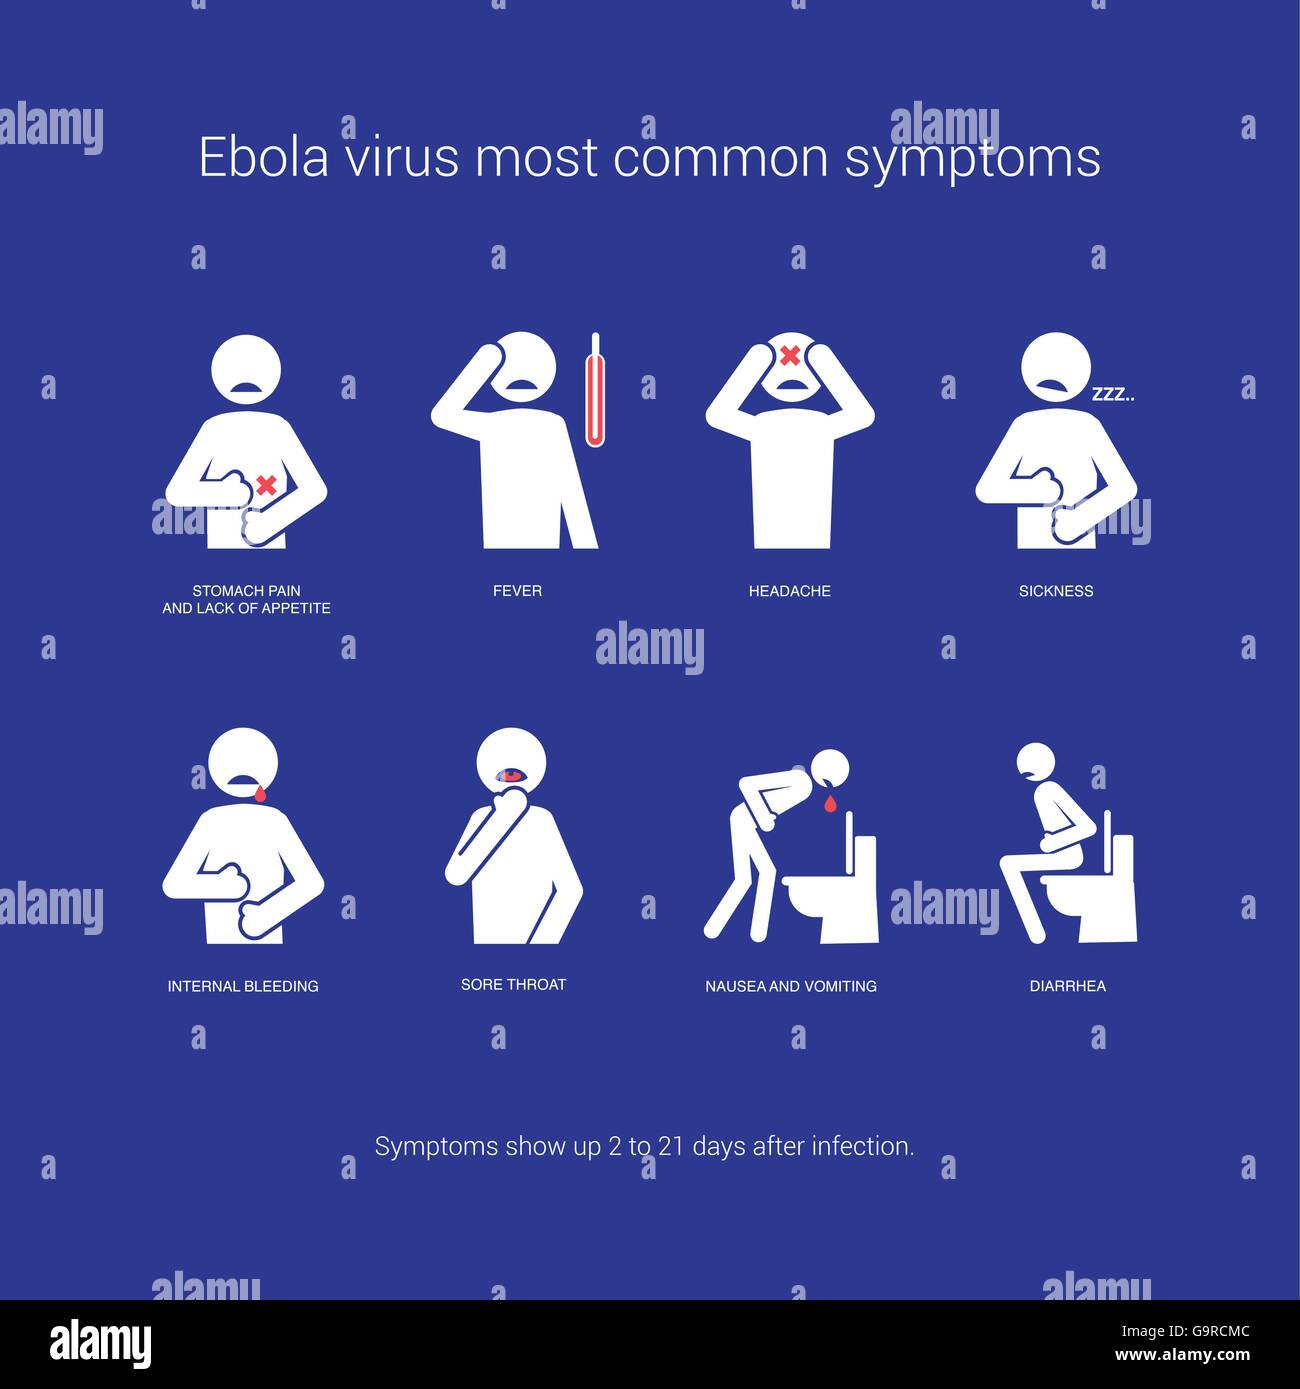 Ebola most common symptoms with stock figures Stock Vector